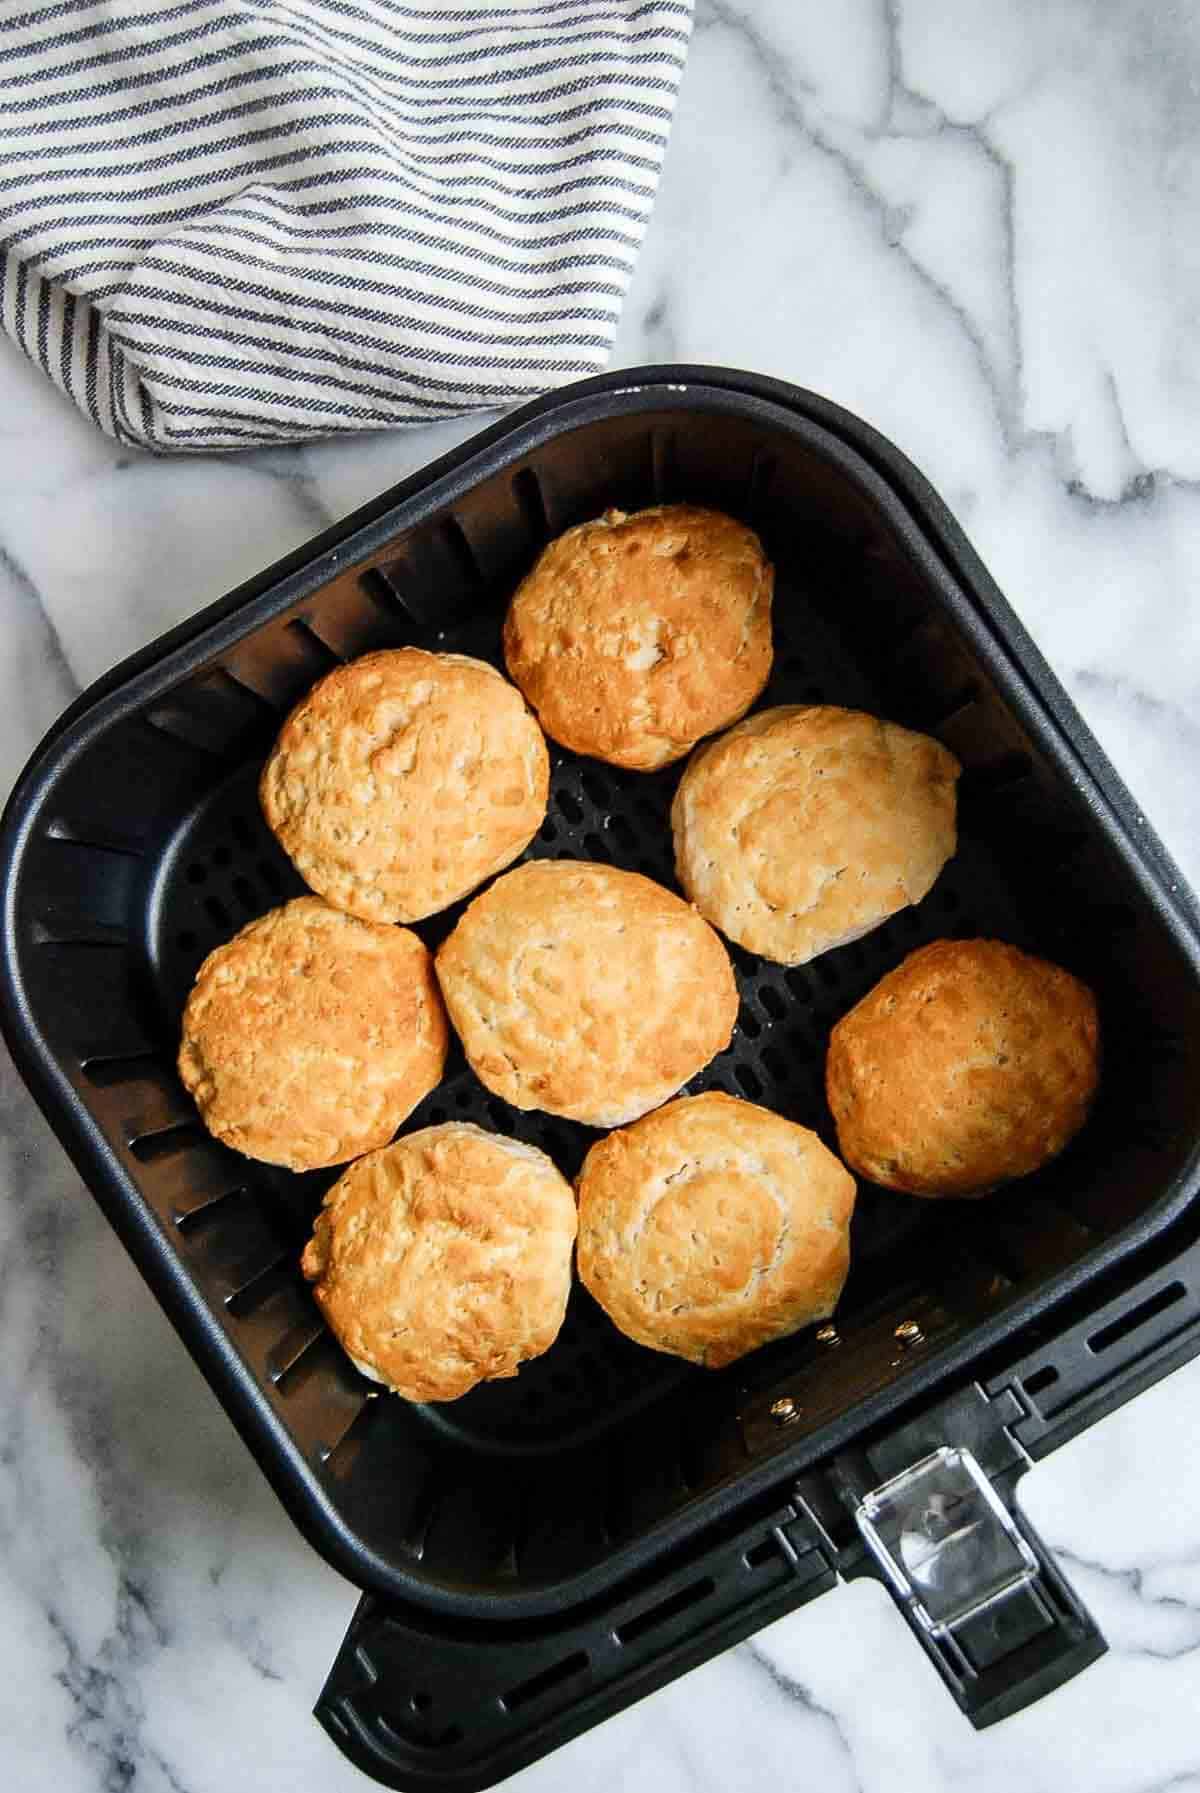 air fryer basket with baked biscuits inside.